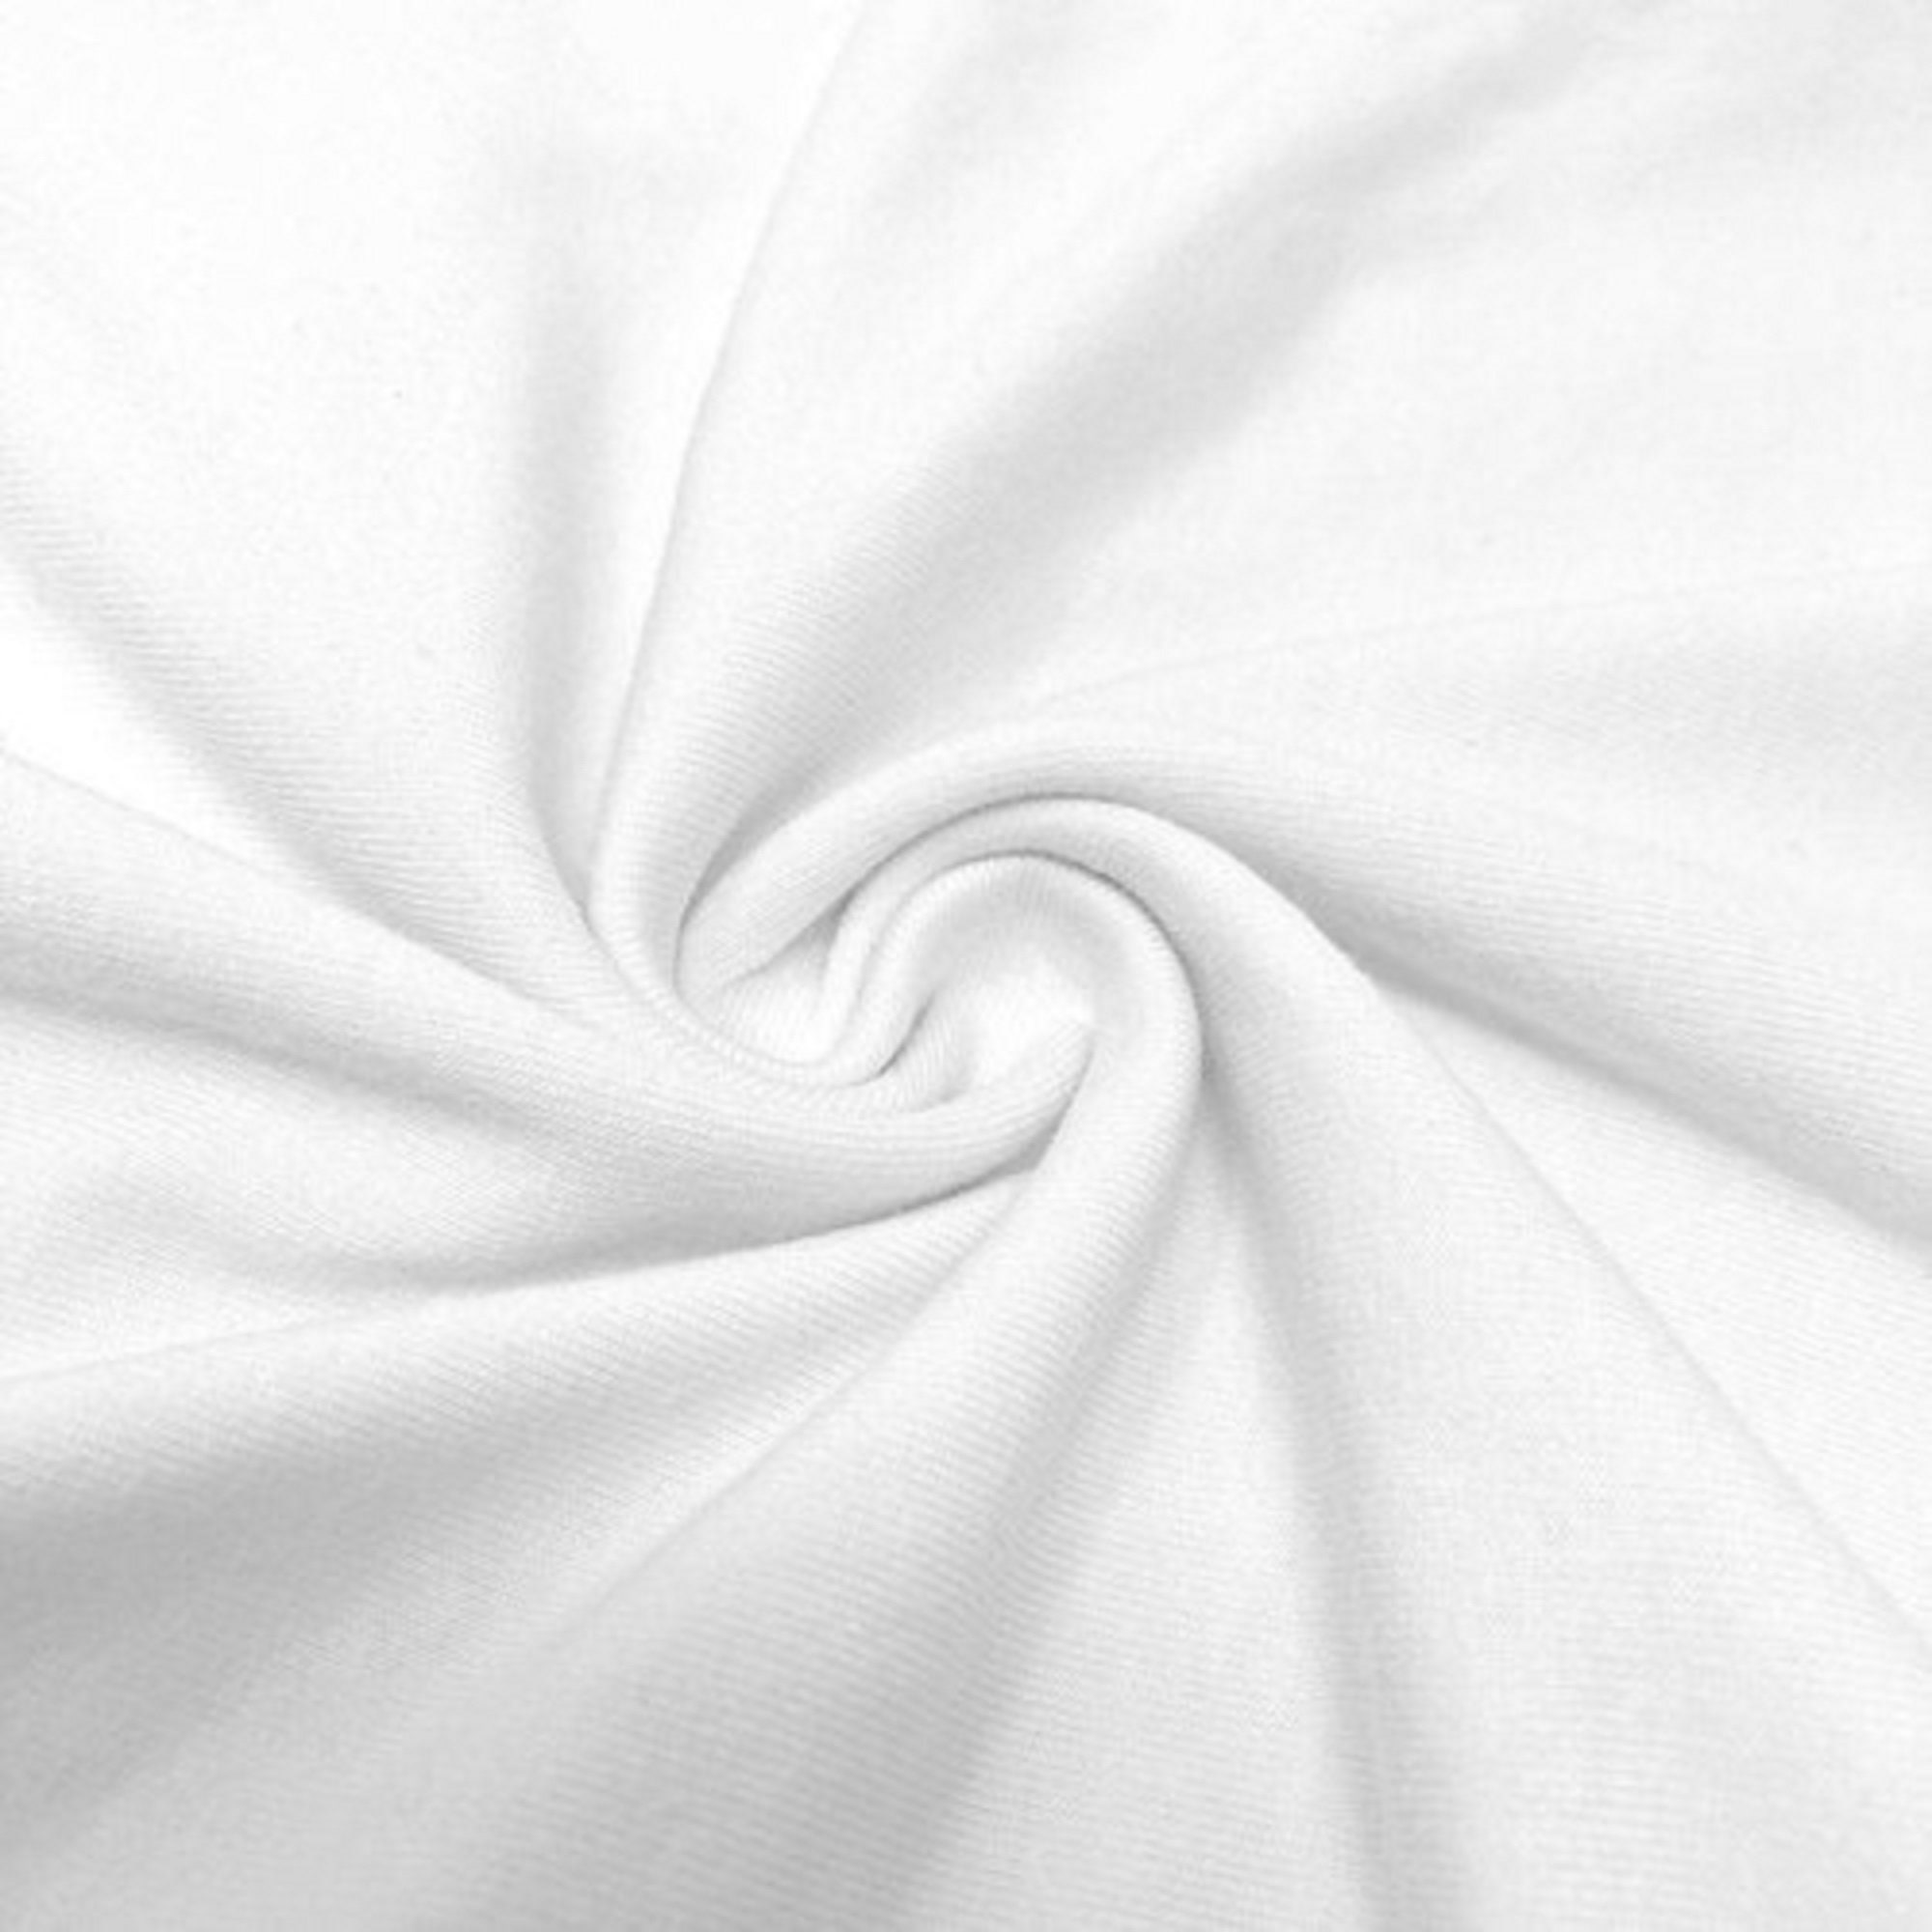 100% Pure Cotton White Fabric by the Yard black cotton | Etsy